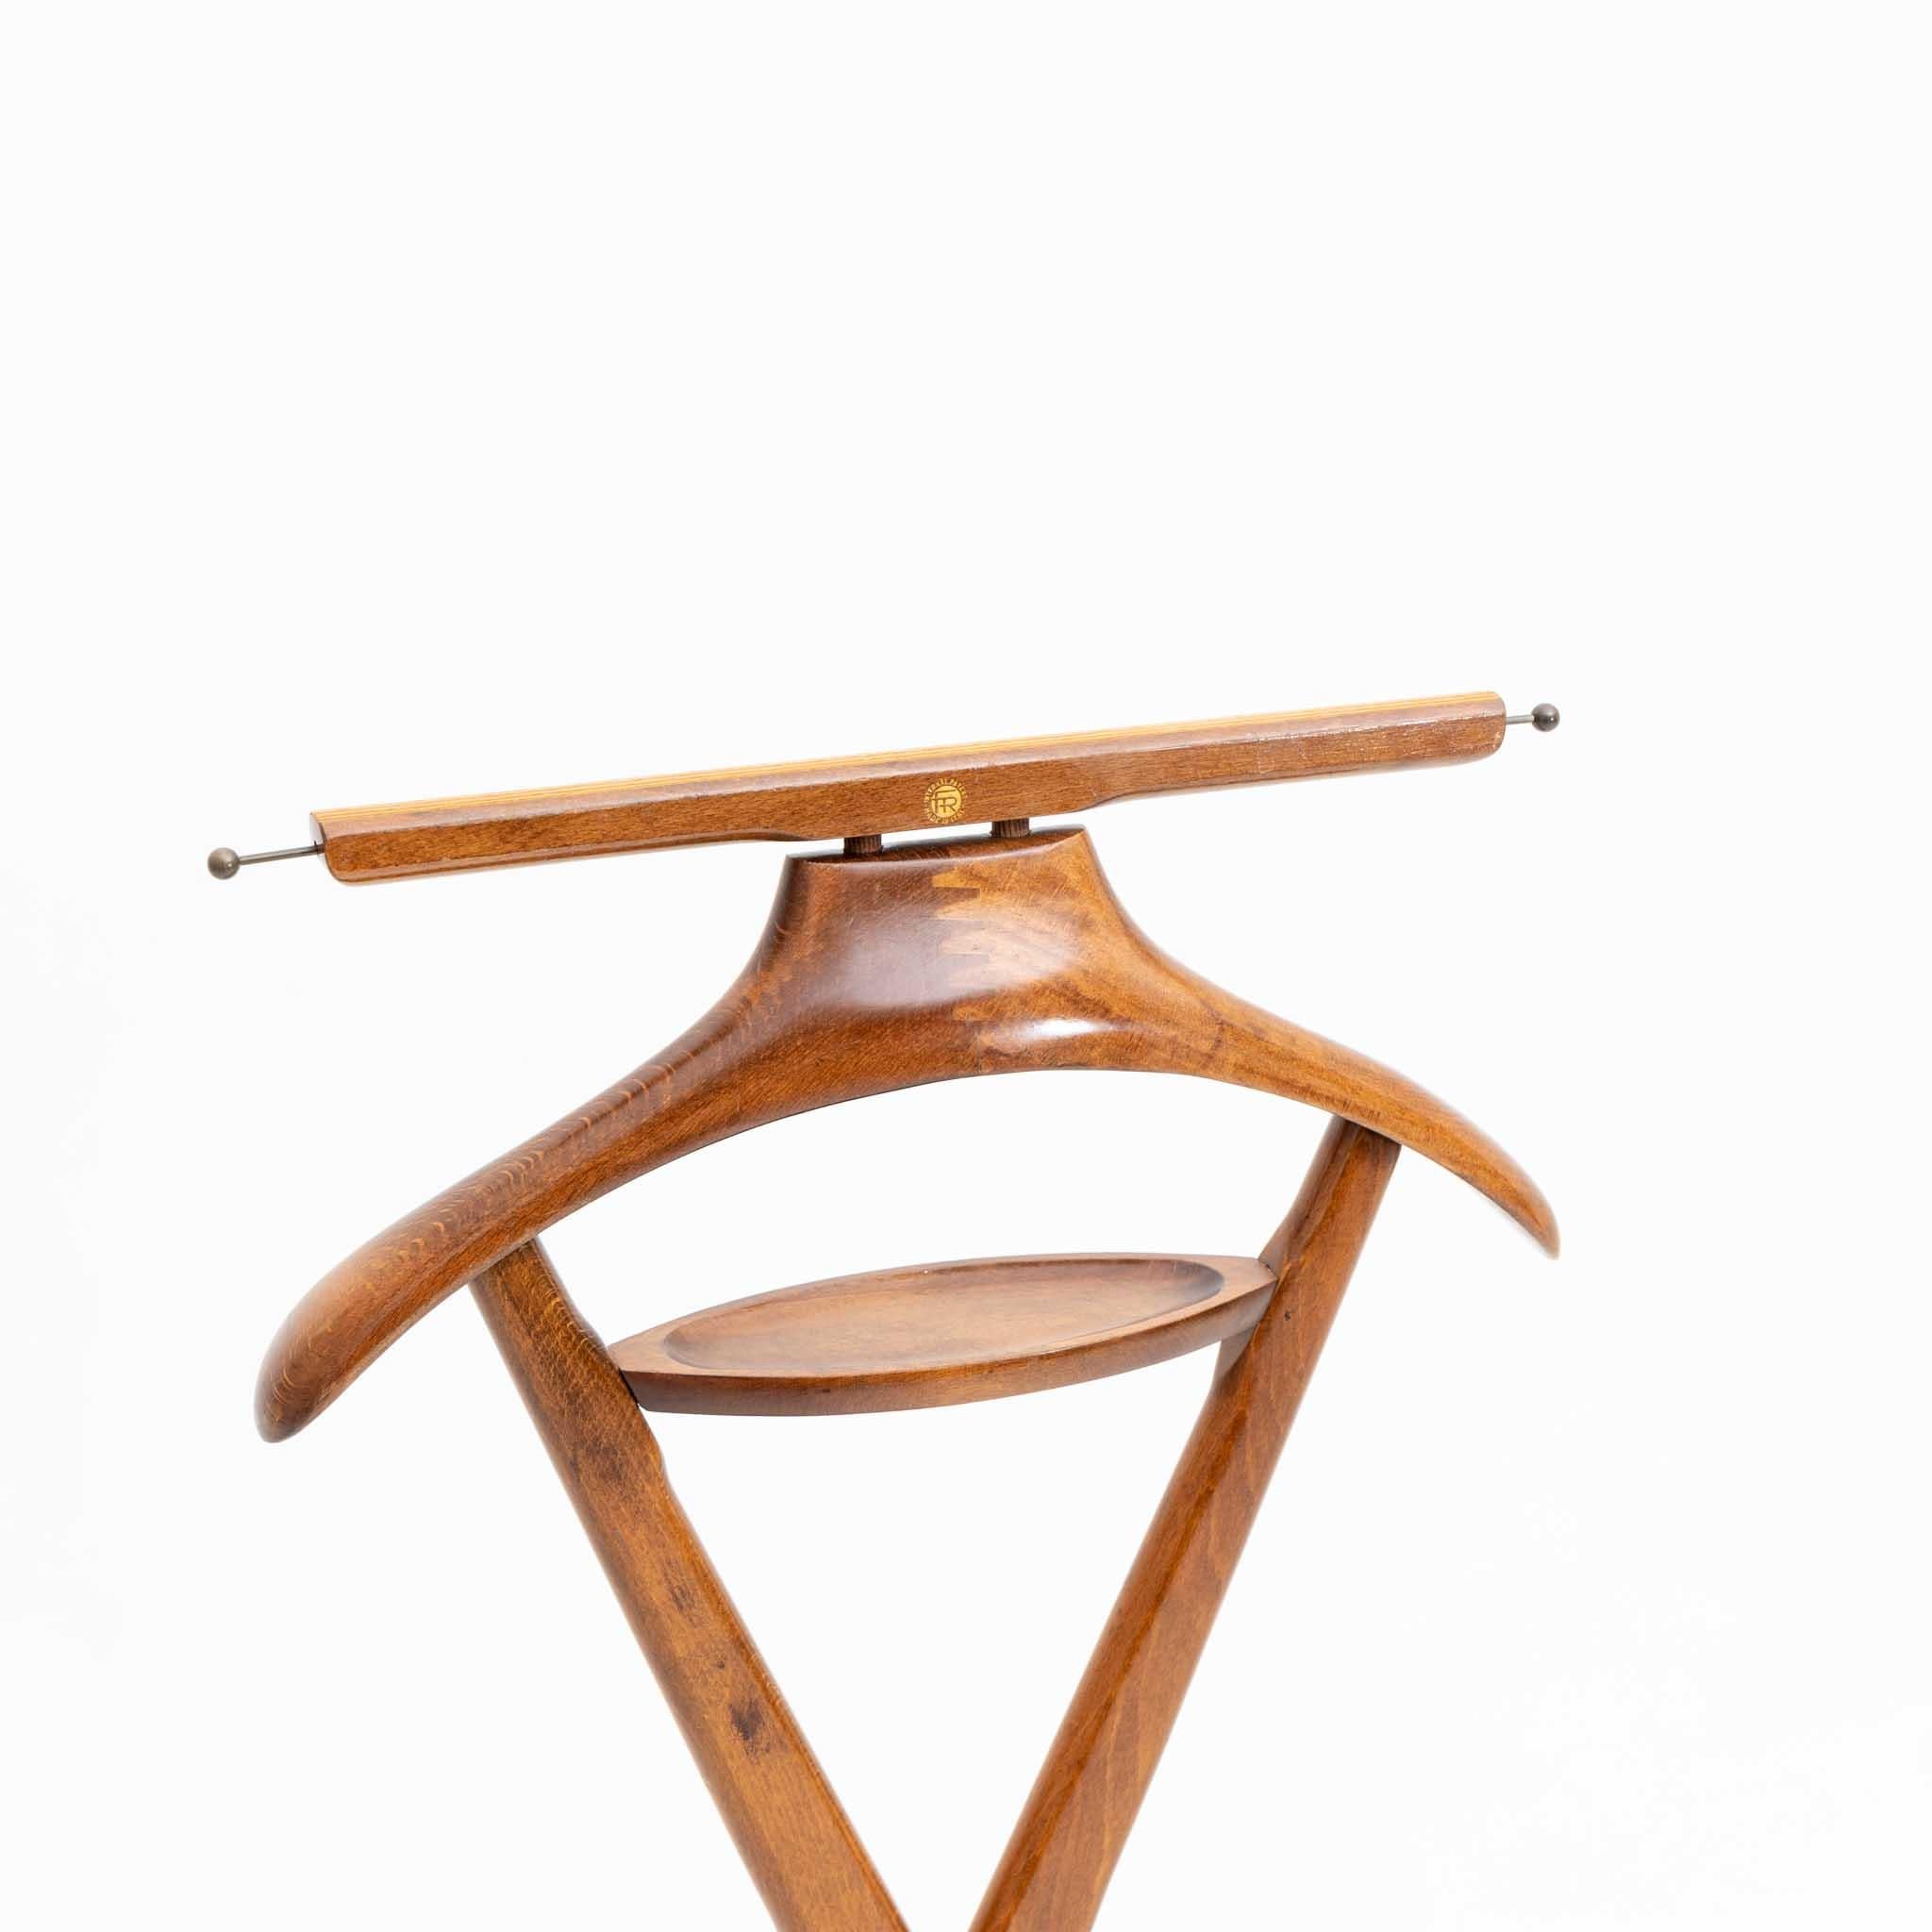 Beech valet stand with x-shaped frame with one small shelf, a coat hook and trouser hanger. The clothes rack is equipped with wheels so it is easy to move. At the top stamp of the company Fratelli Reguiti.